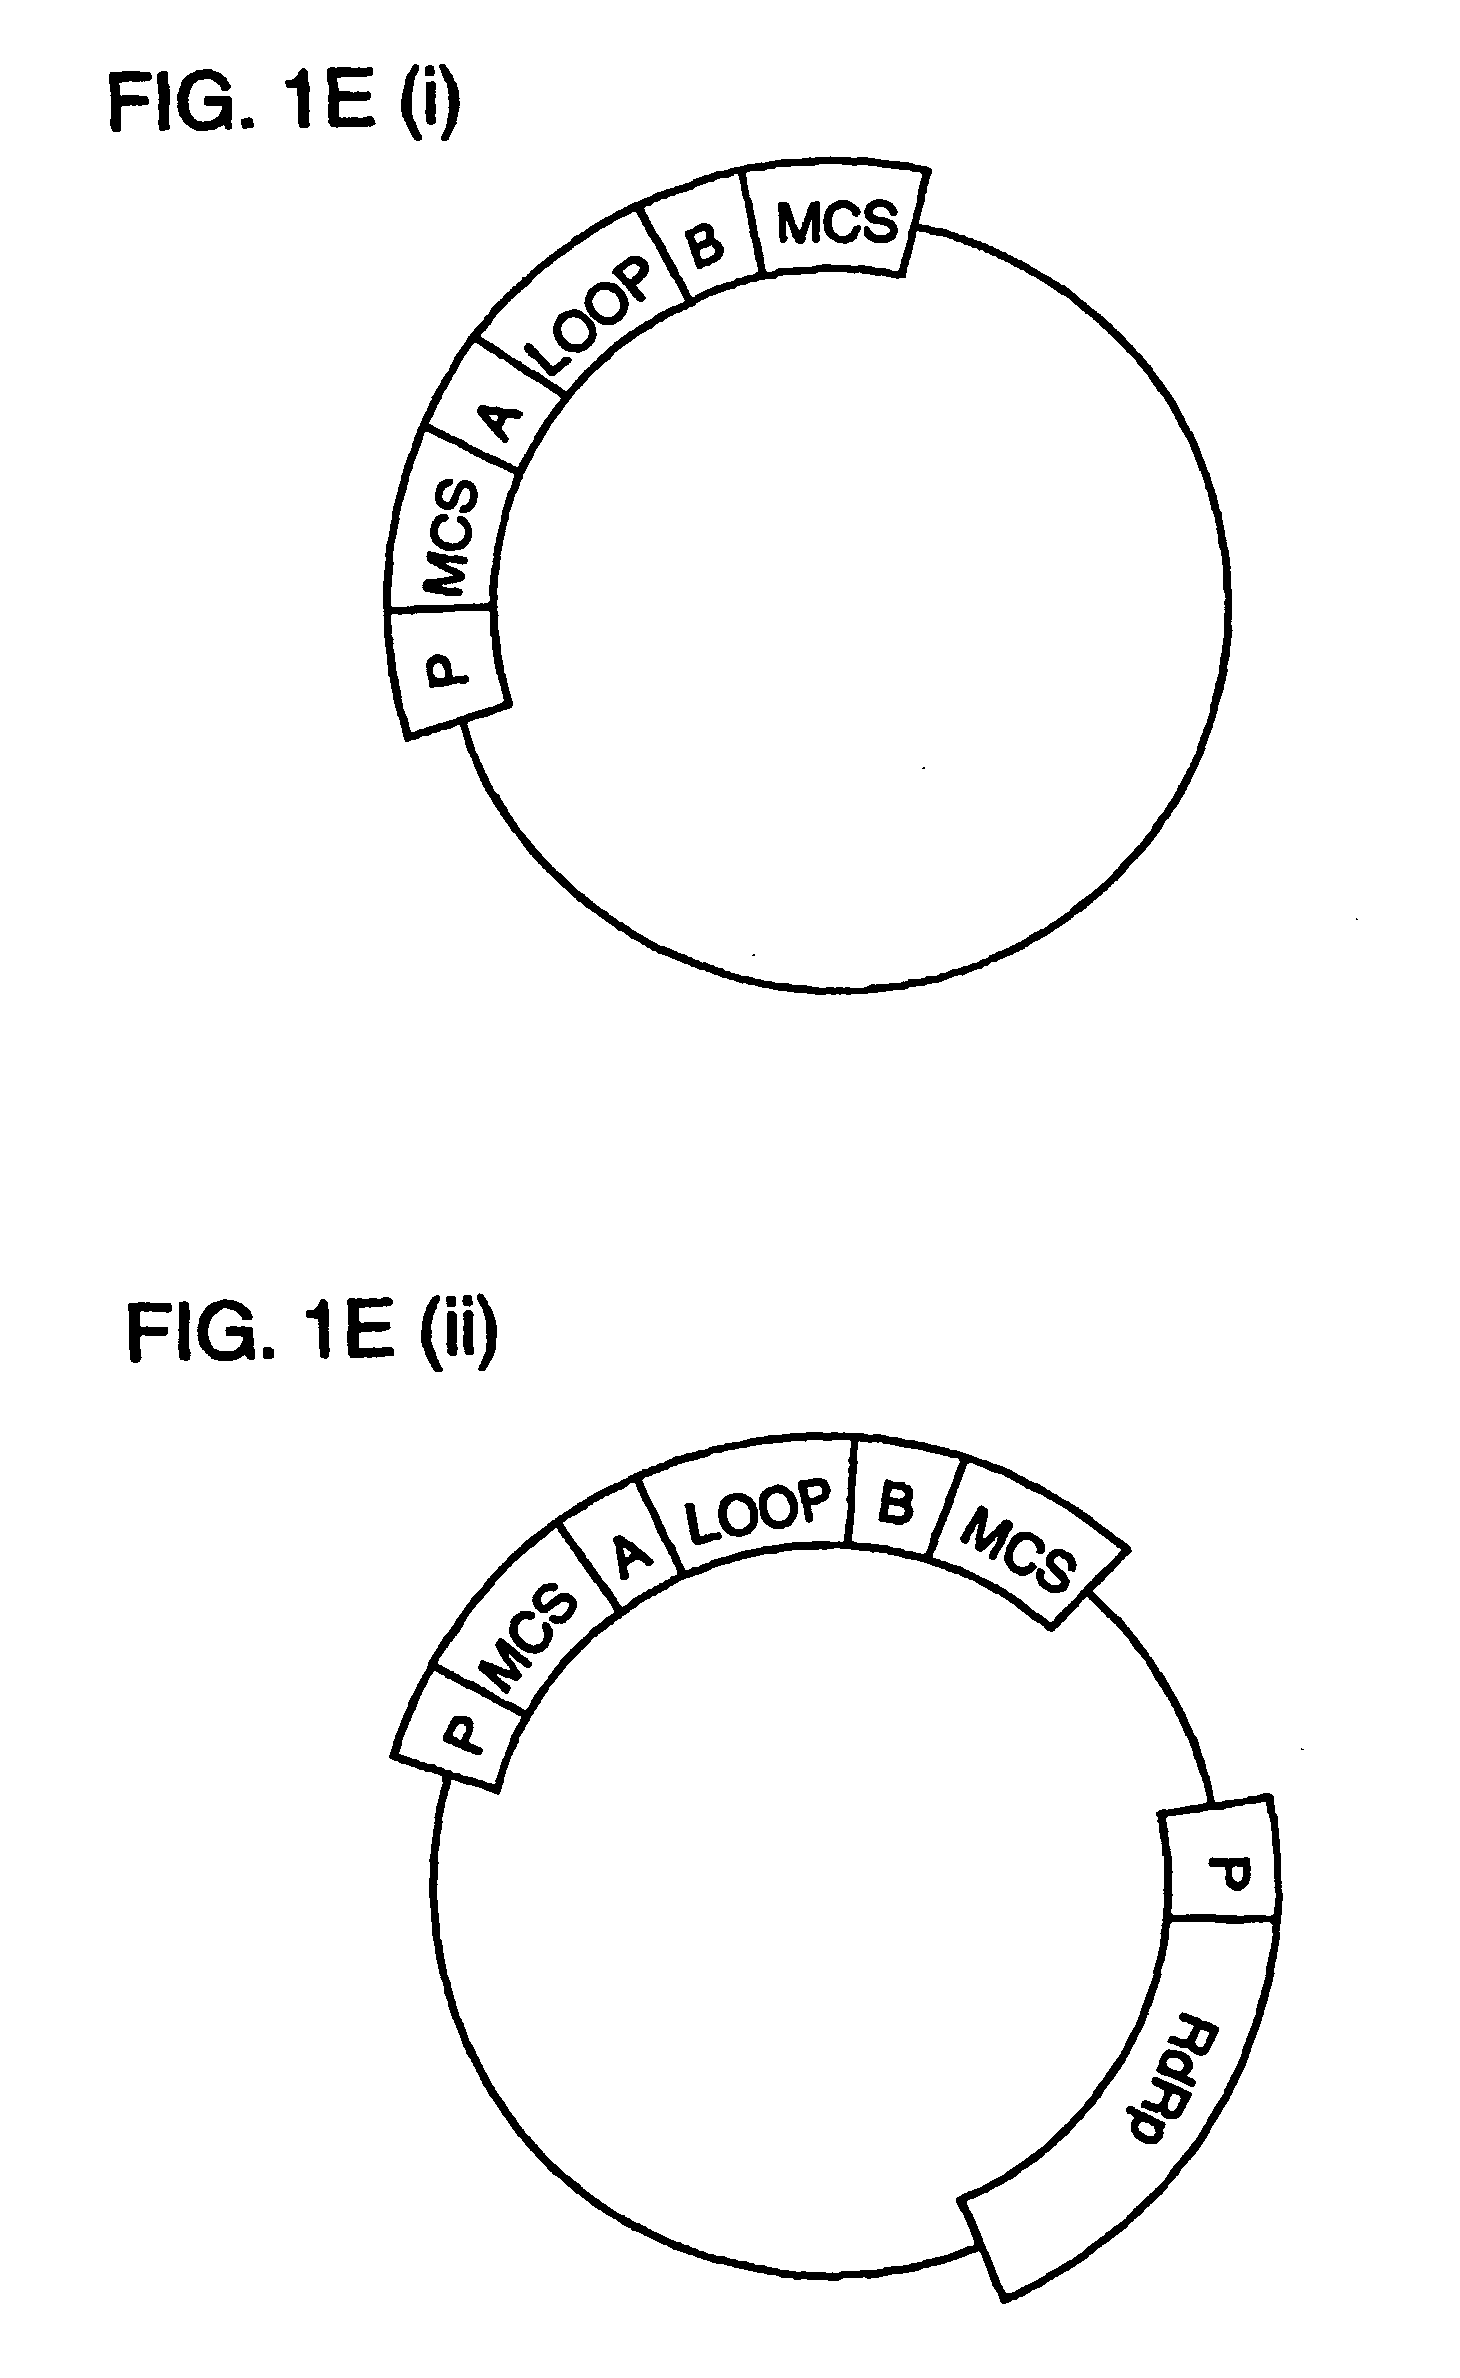 Double stranded rna structures and constructs, and methods for generating and using the same